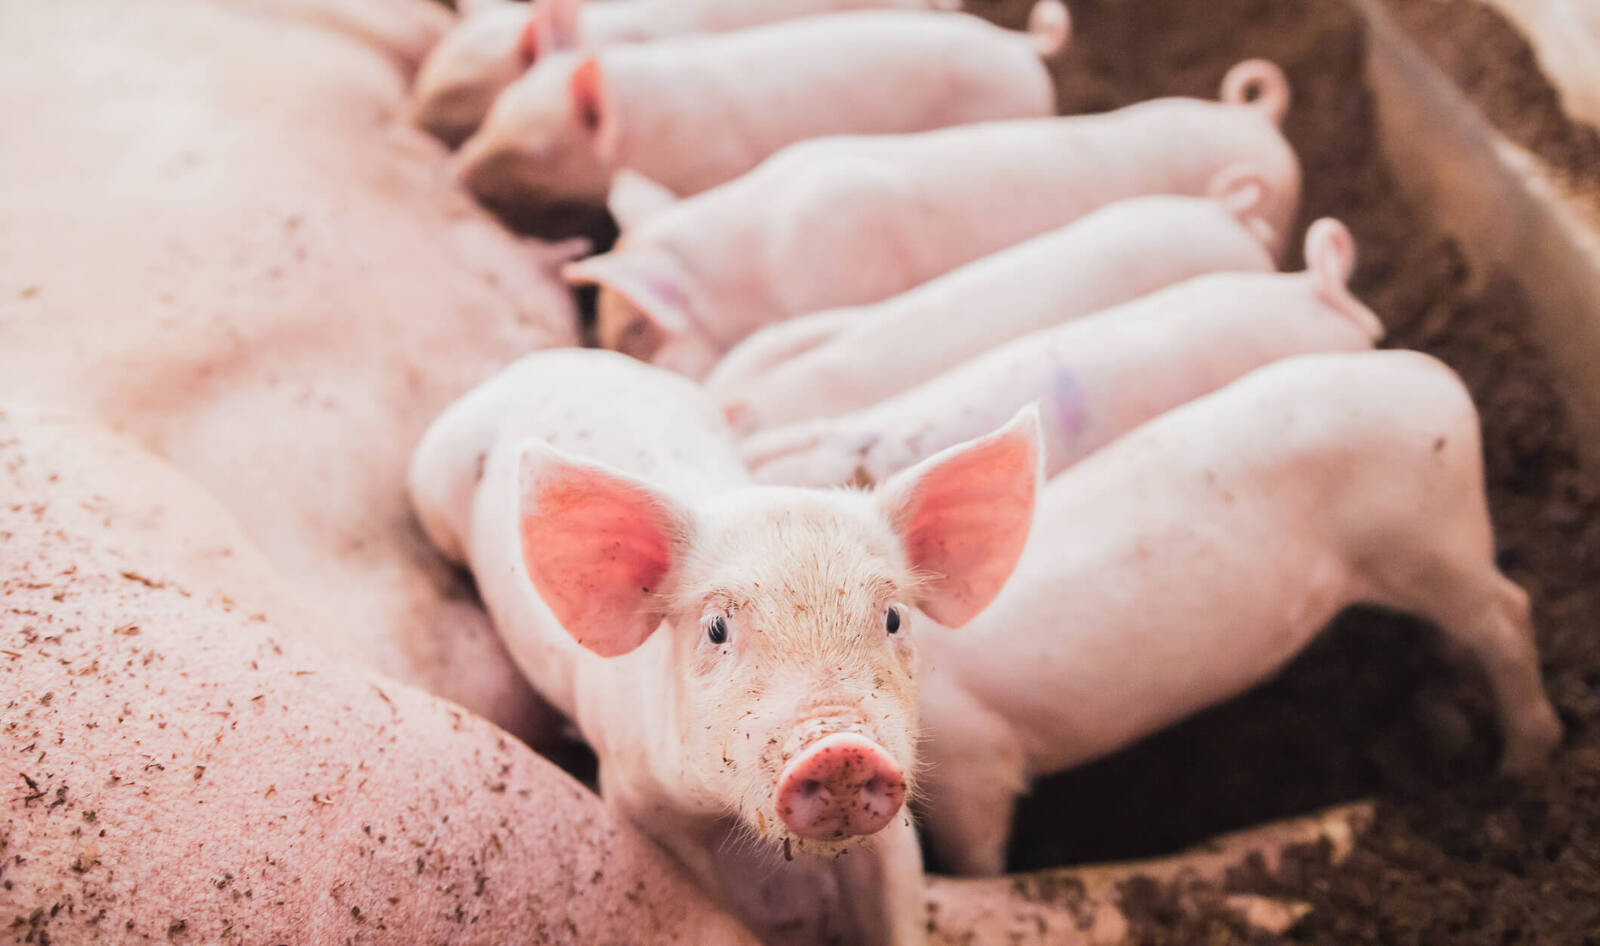 Pork Industry Looks to Overturn CA’s Proposition 12. Will the Supreme Court Let Cruelty Be Status Quo?